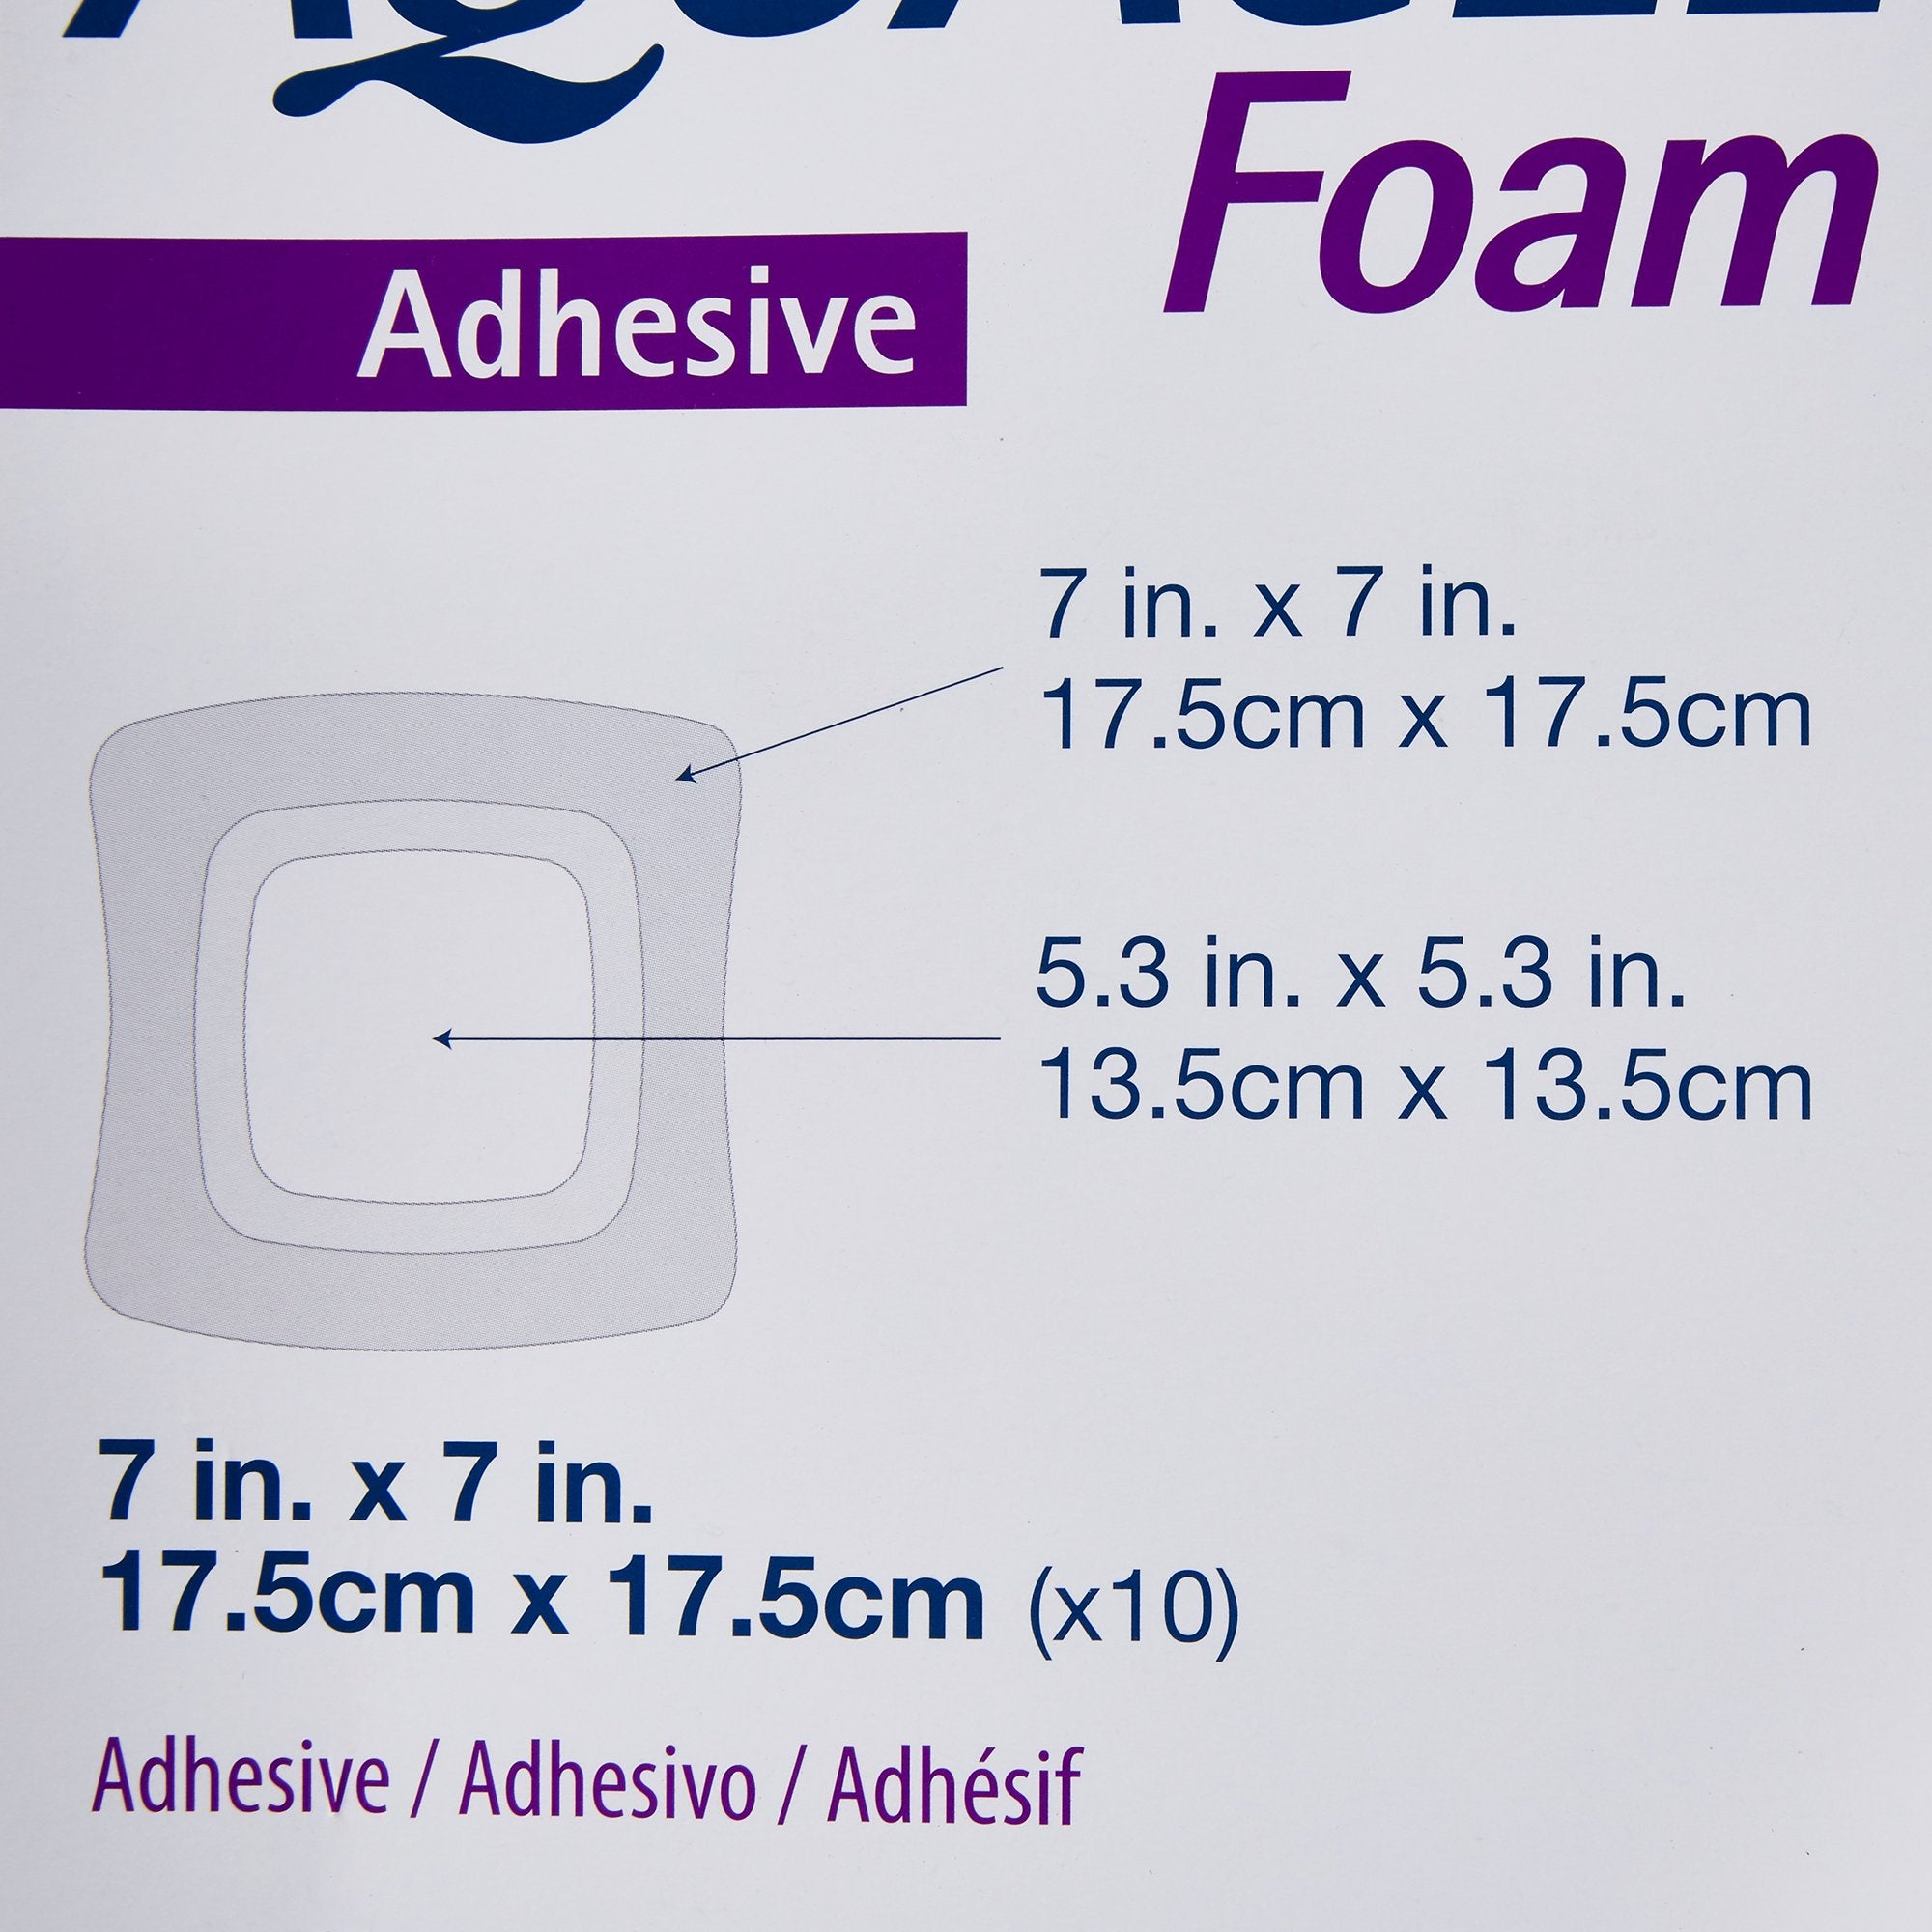 Foam Dressing Aquacel 7 X 7 Inch With Border Film Backing Silicone Adhesive Square Sterile